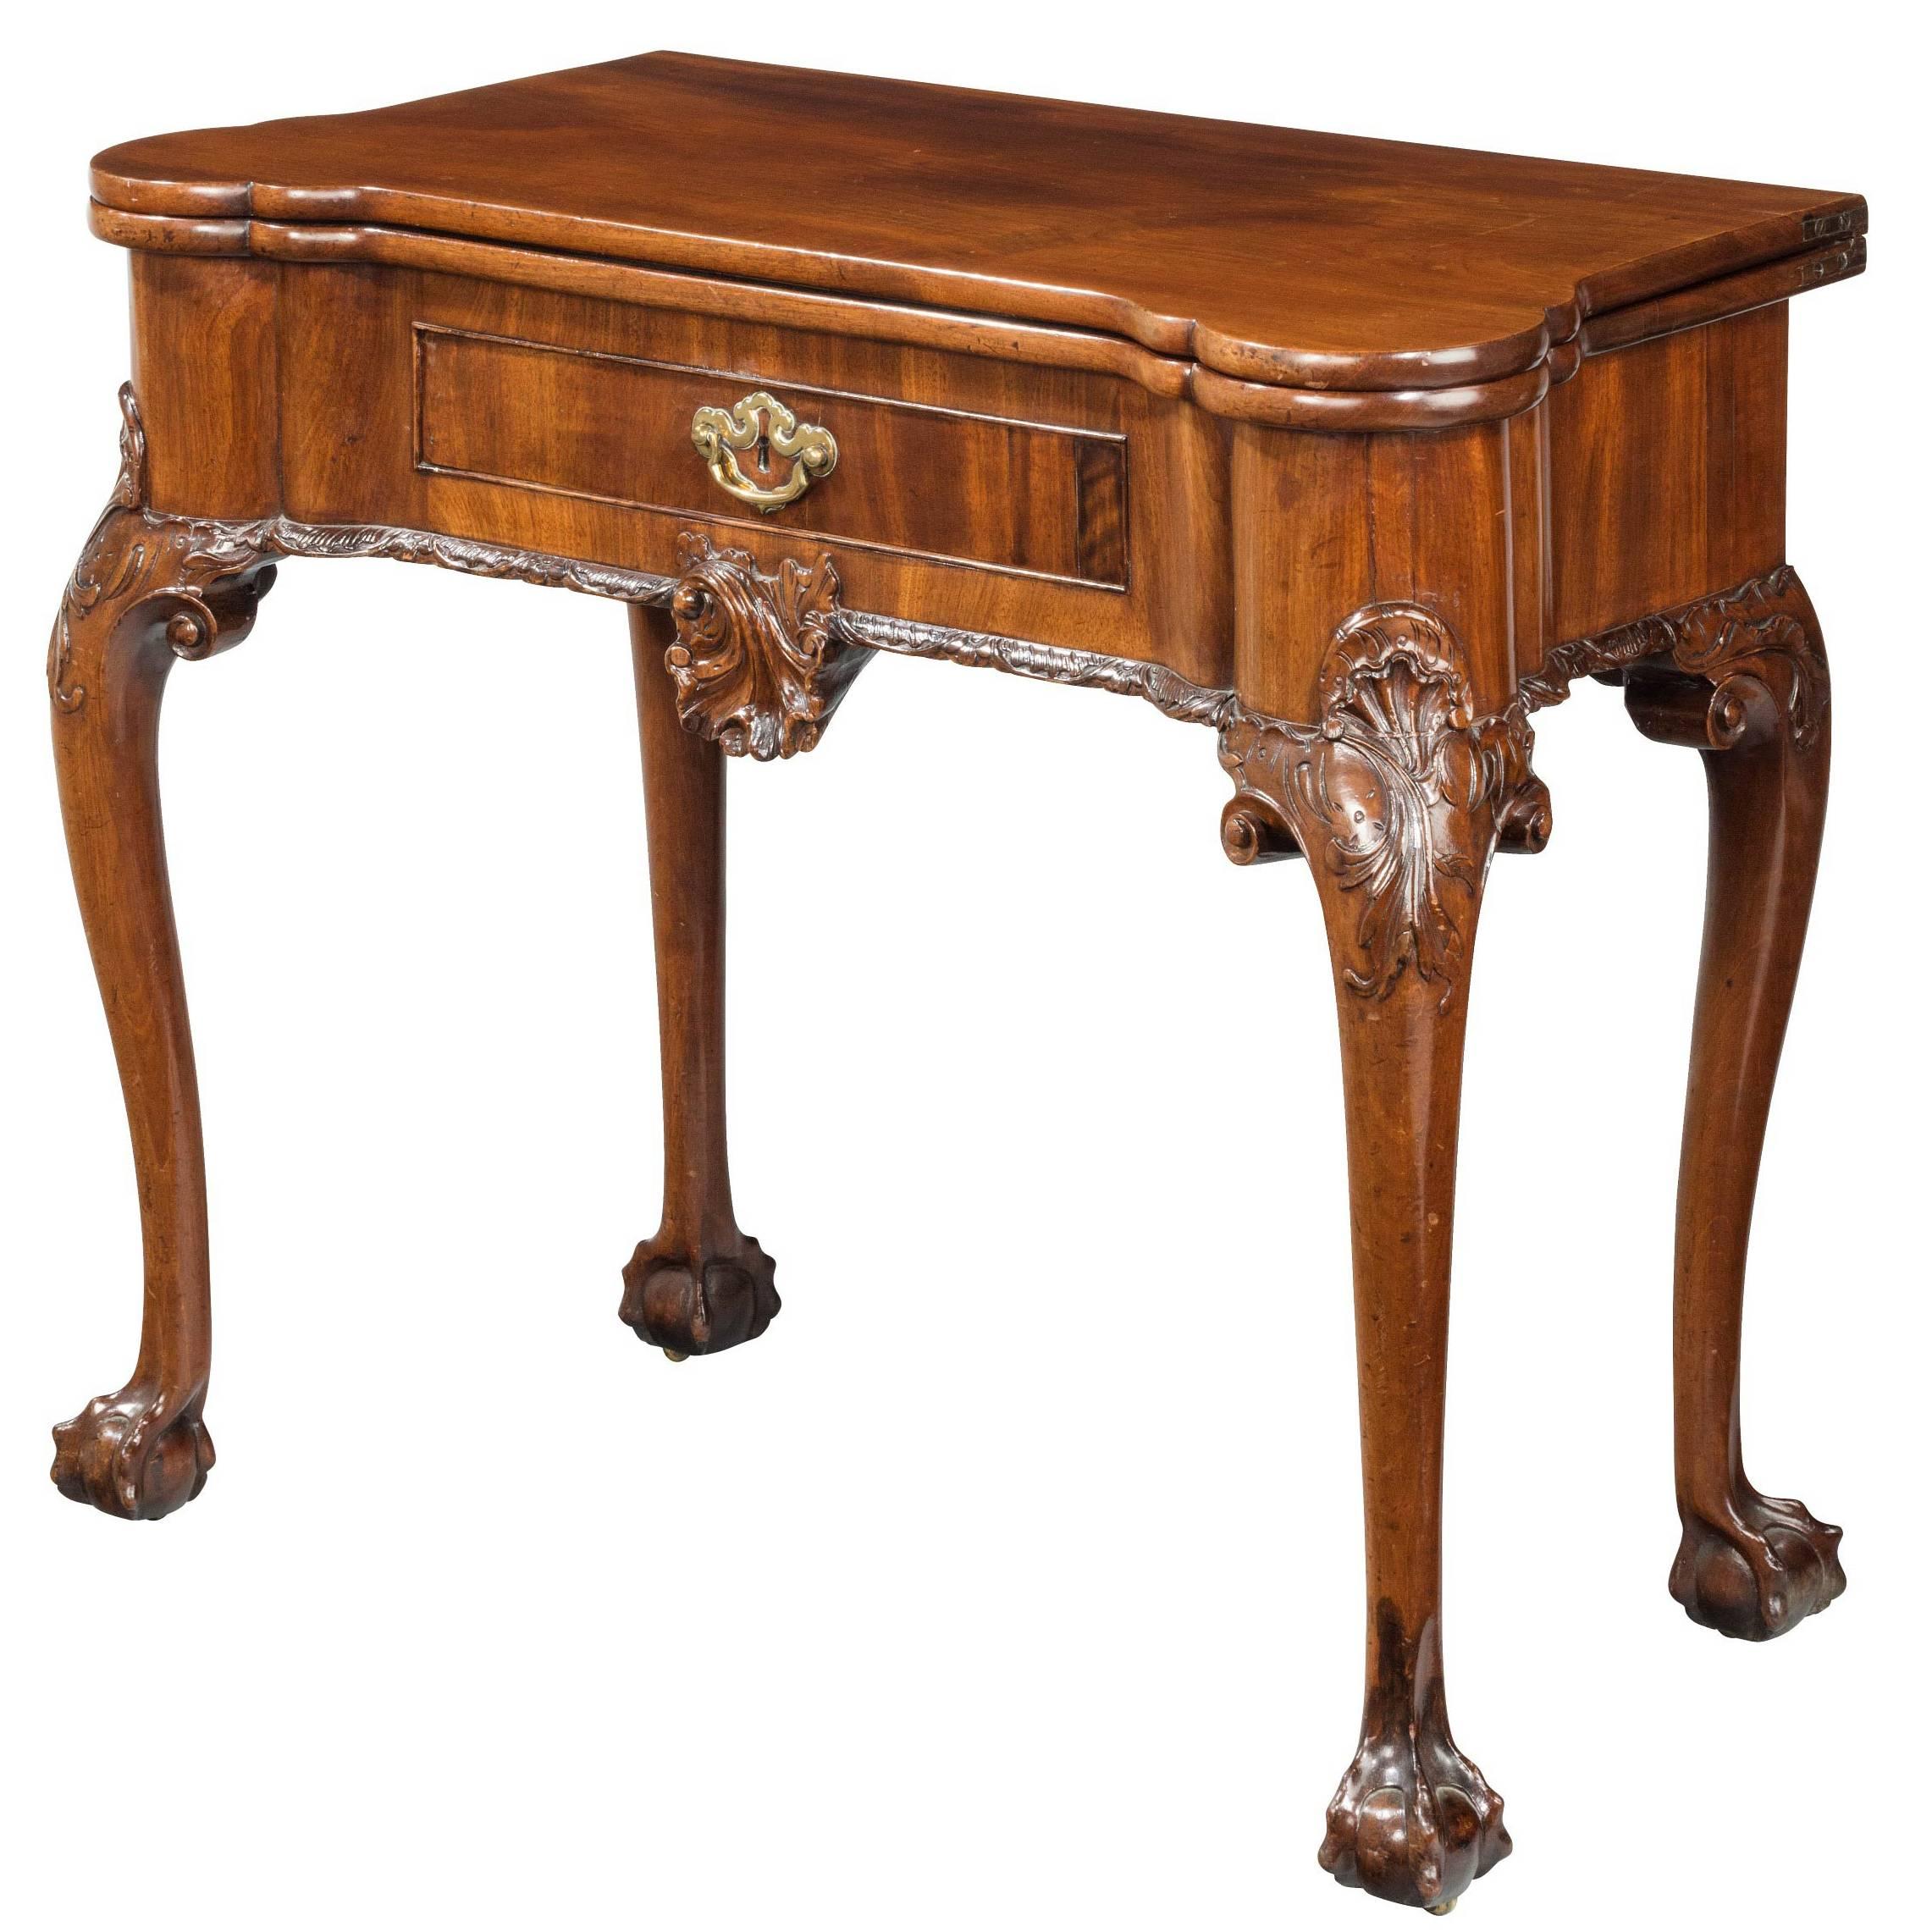 Mid-18th Century Card Table the Lappet Corners with Double Mouldings